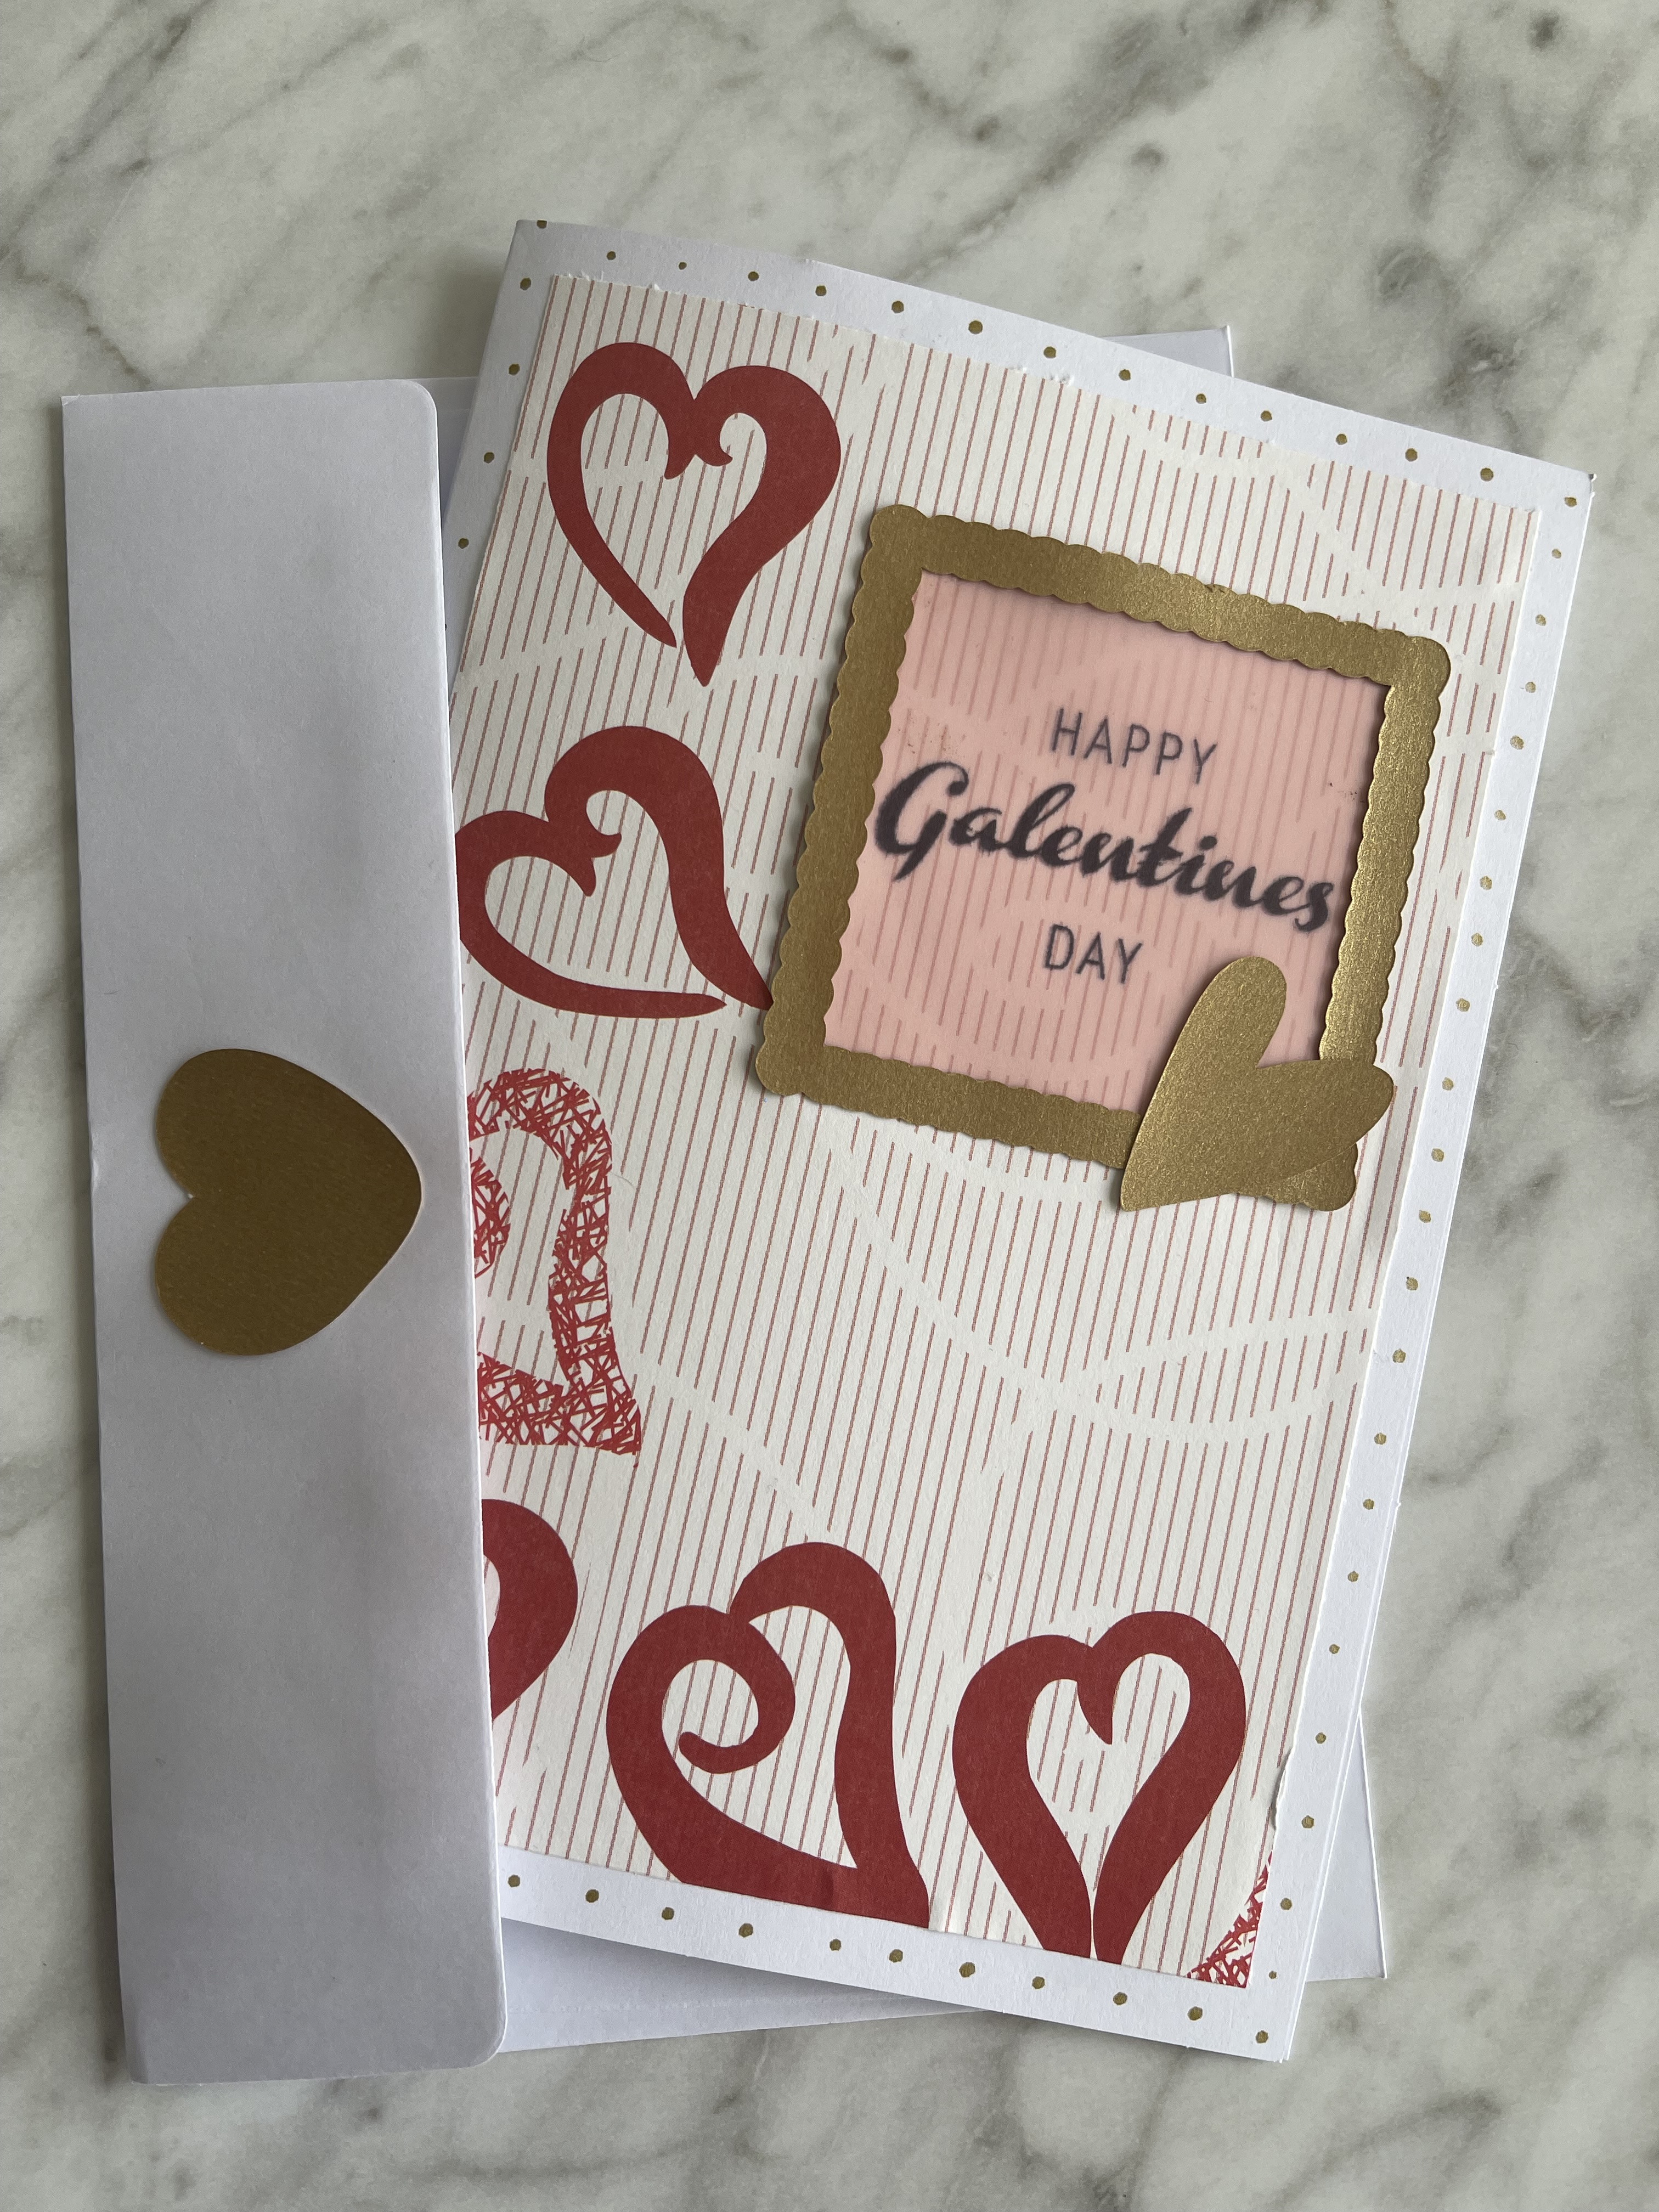 Galentine Card made from paper craft